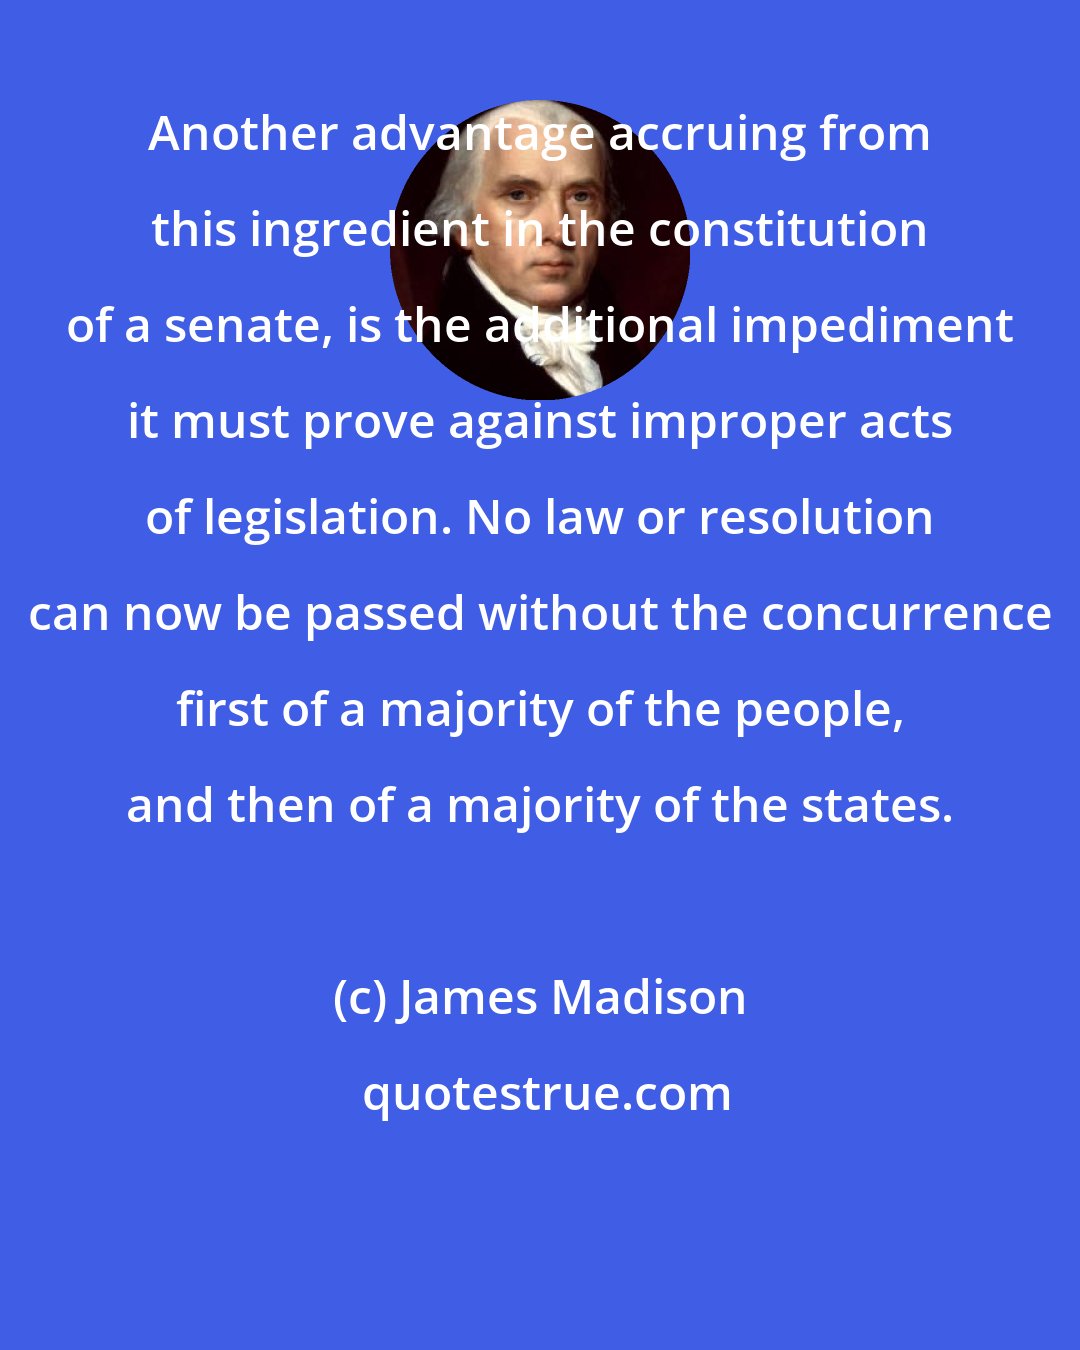 James Madison: Another advantage accruing from this ingredient in the constitution of a senate, is the additional impediment it must prove against improper acts of legislation. No law or resolution can now be passed without the concurrence first of a majority of the people, and then of a majority of the states.